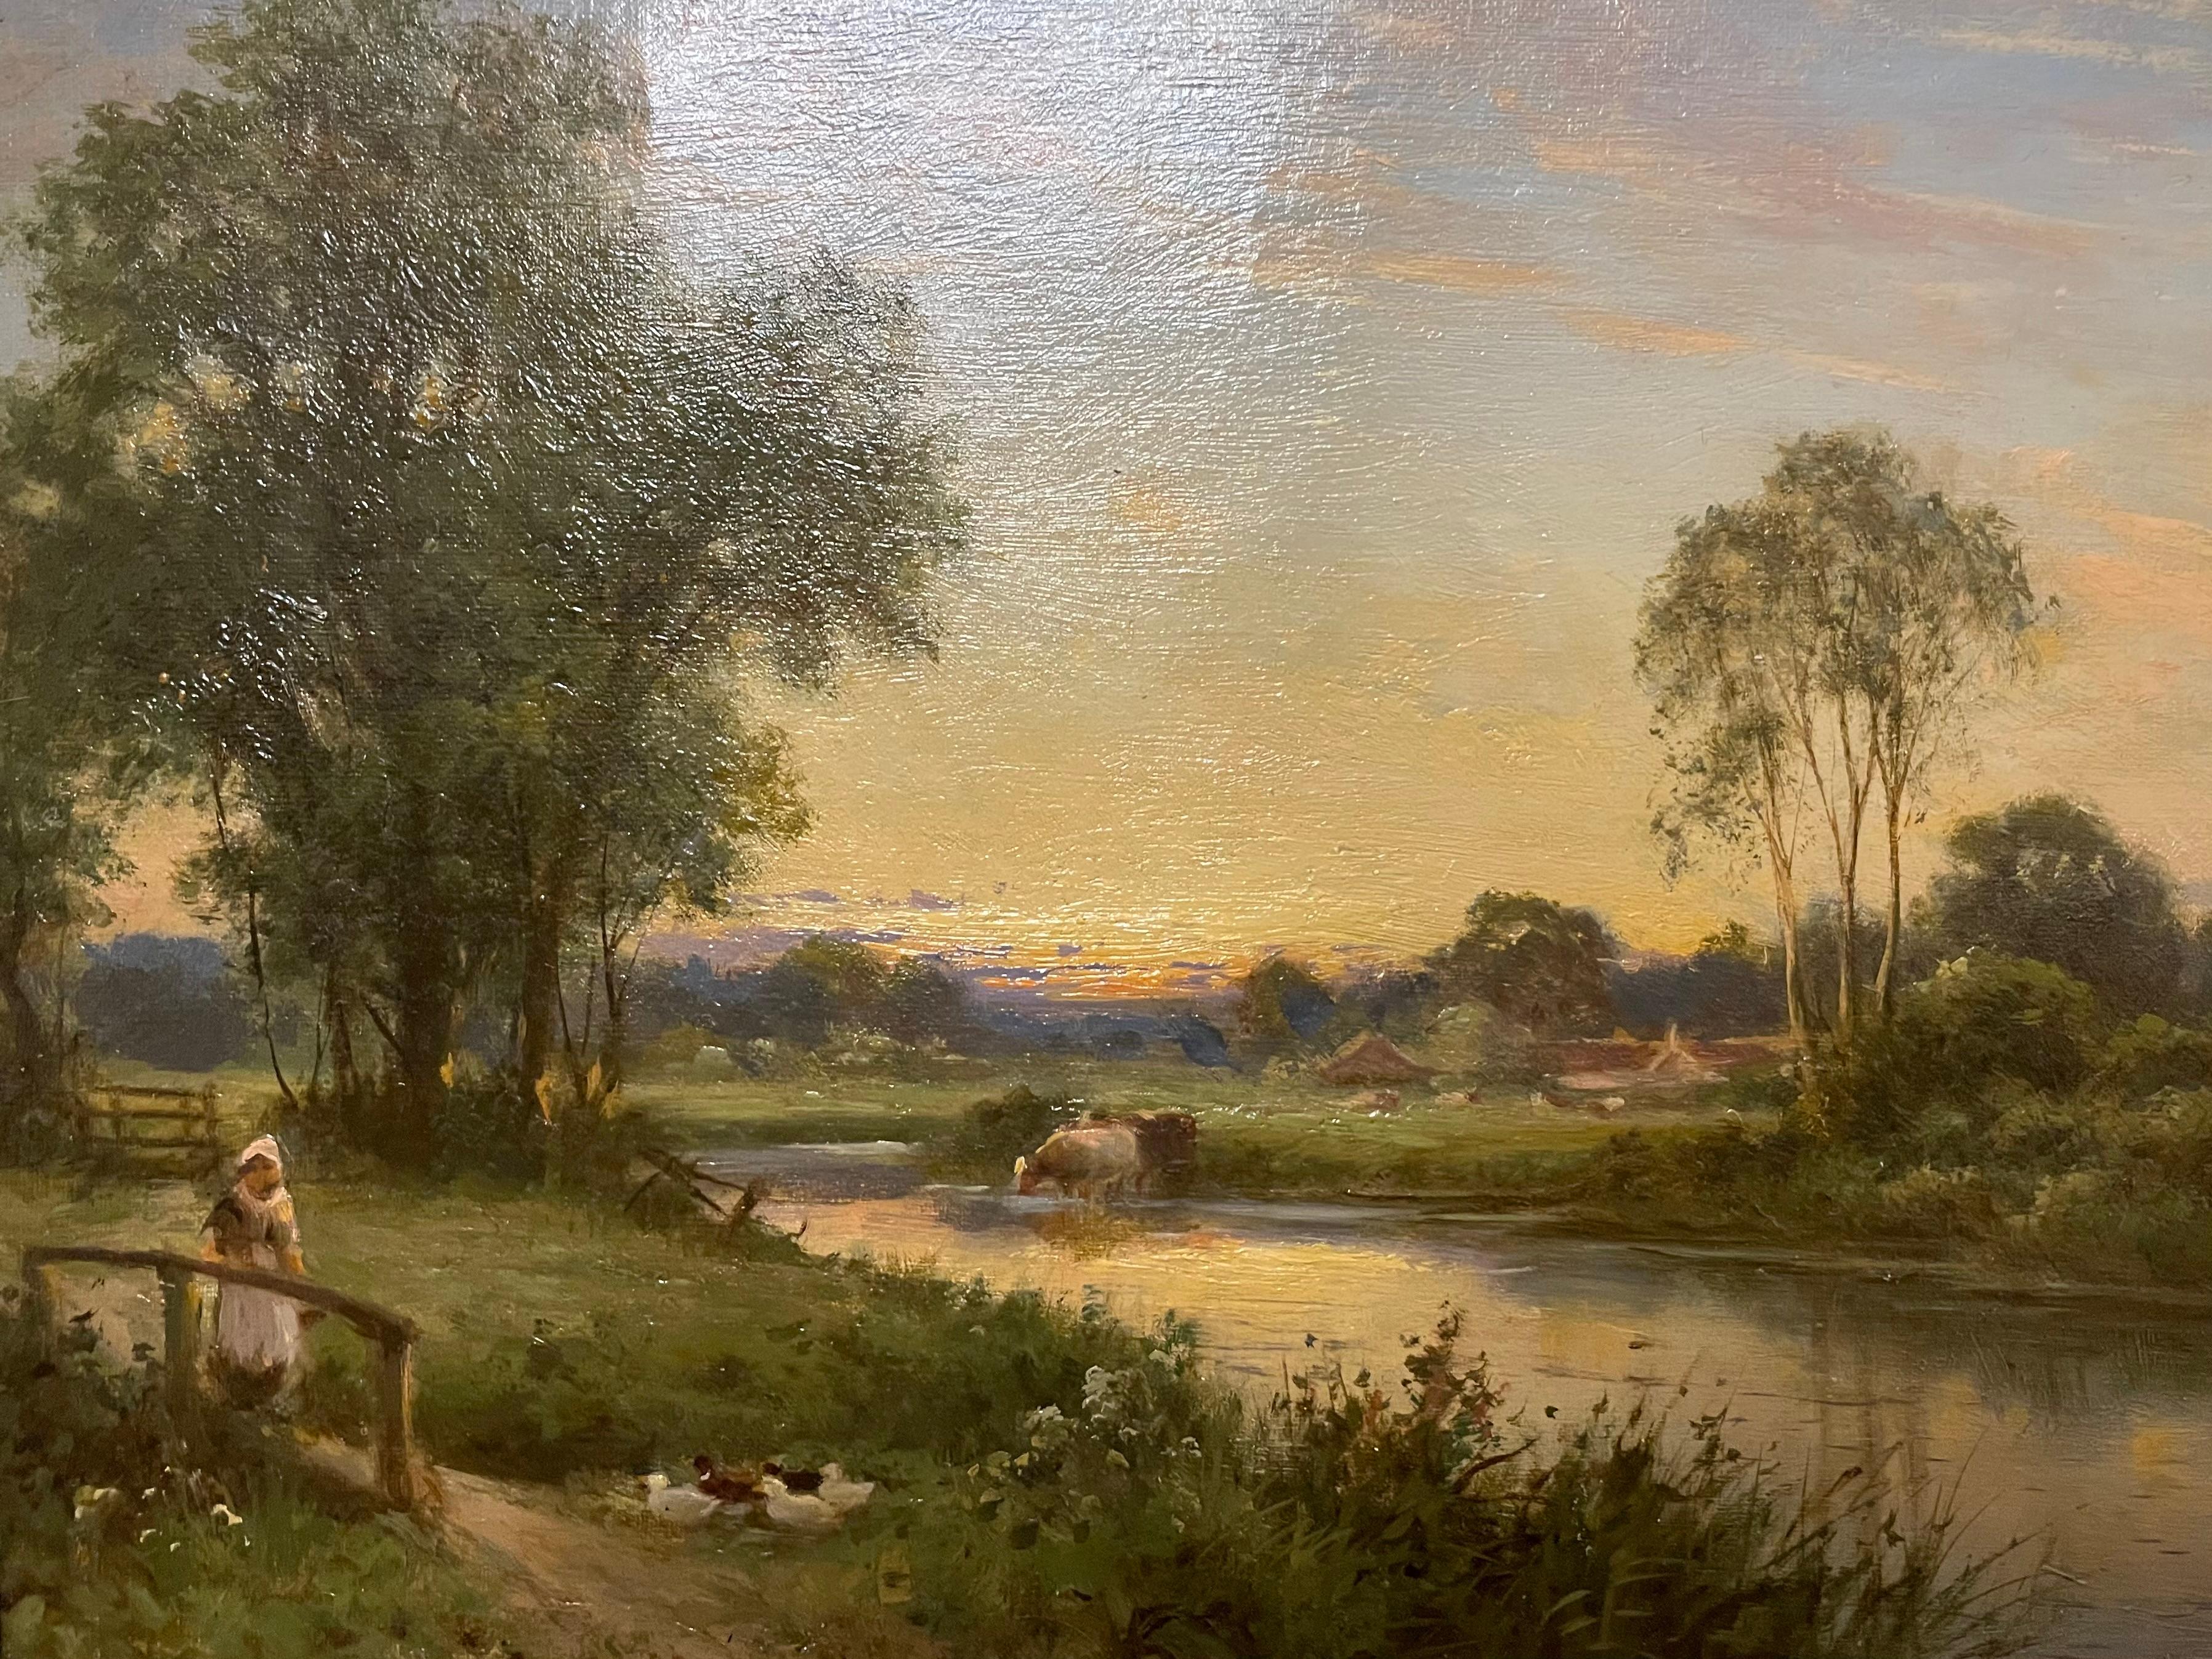 Shere, Surrey, 19th century landscape oil on canvas - Painting by George Vicat Cole RA